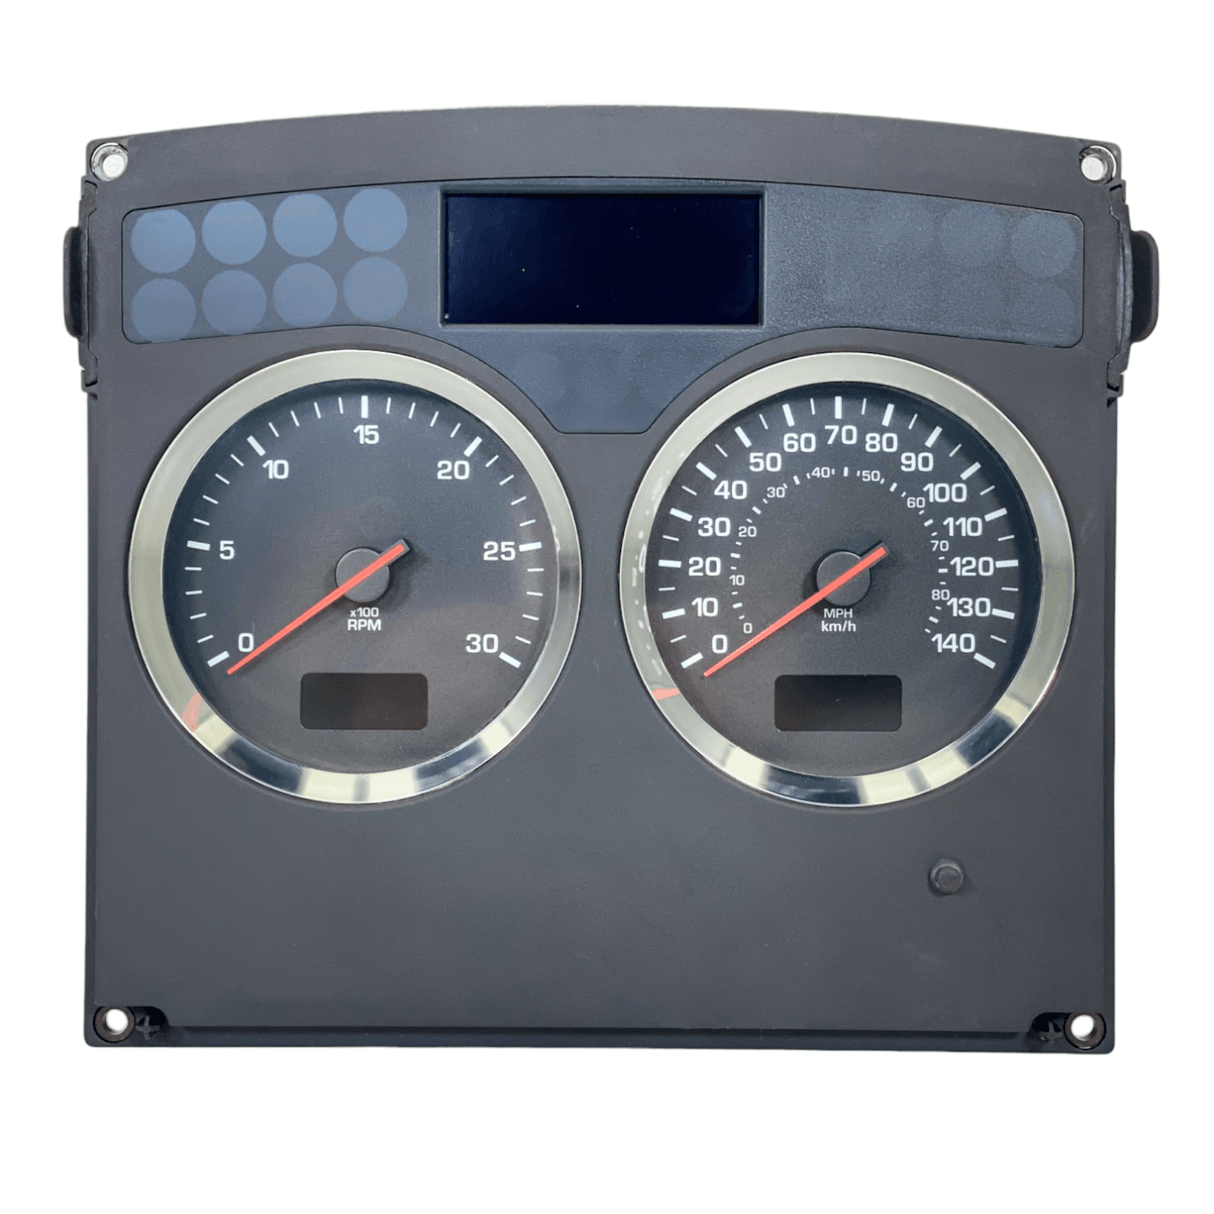 Q43-1163-2-1-107 Genuine Paccar Instrument Cluster - Truck To Trailer